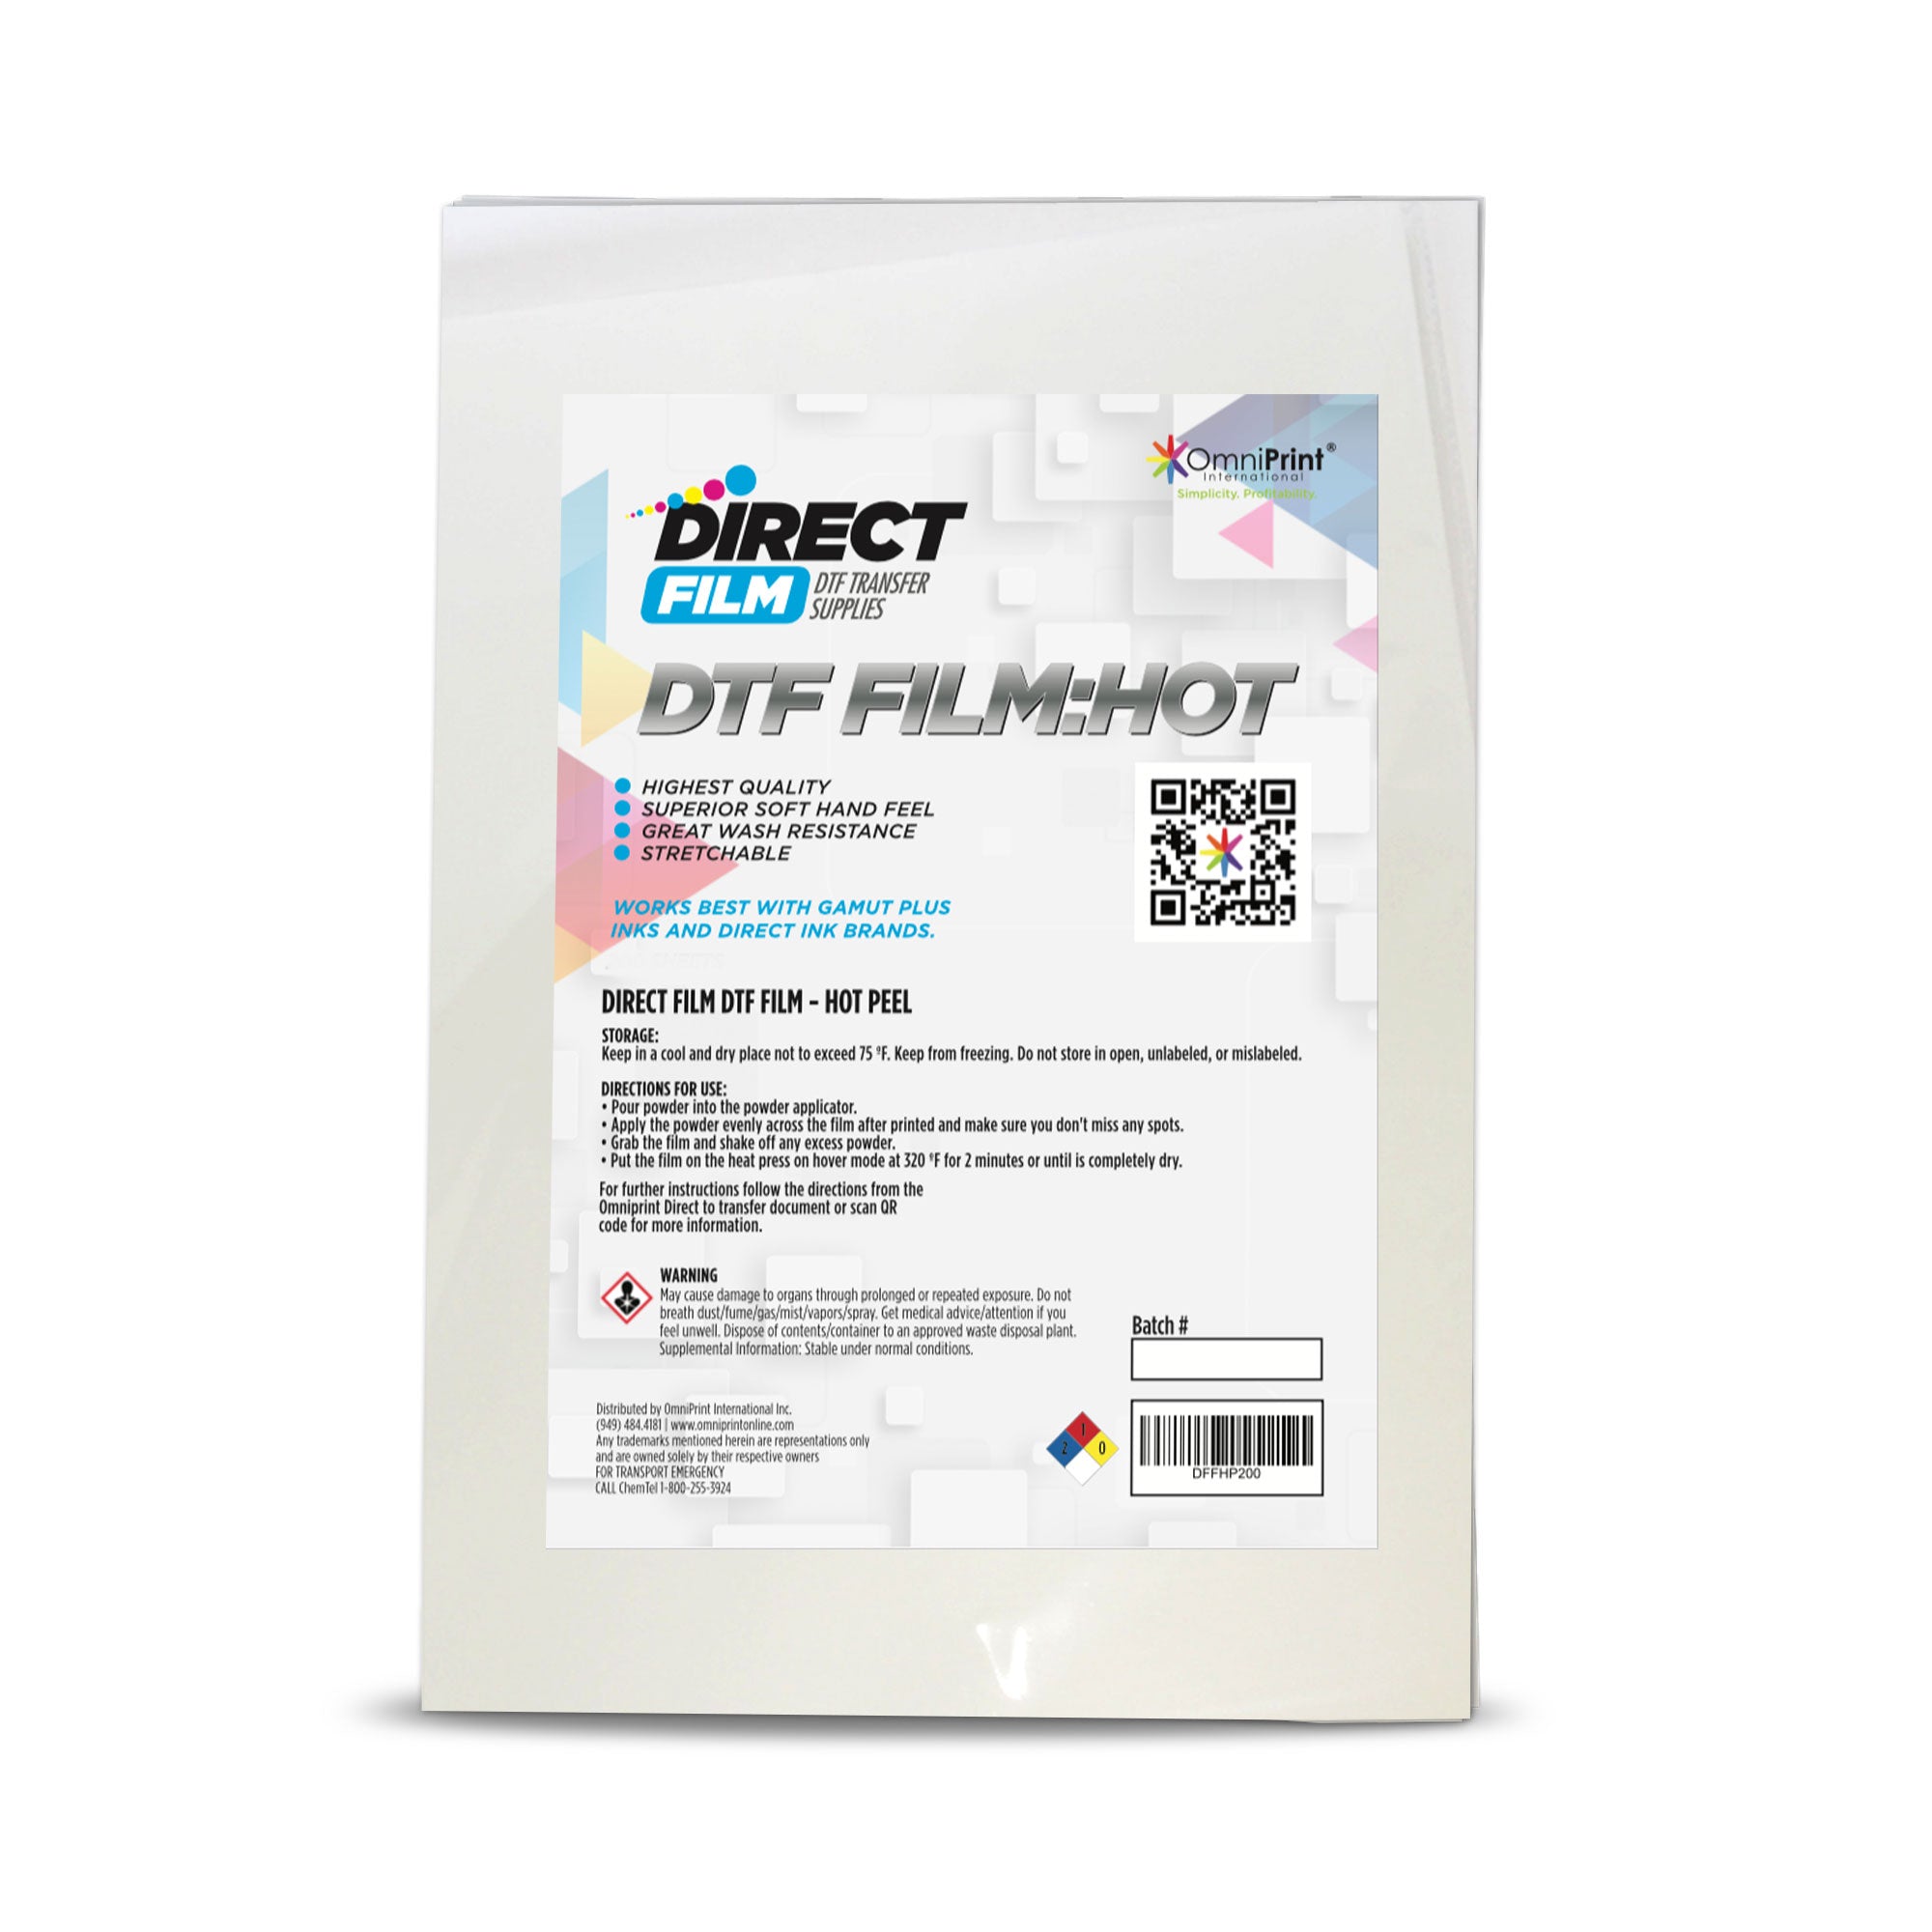 High Quality Hot Peel Films for DTF Printers